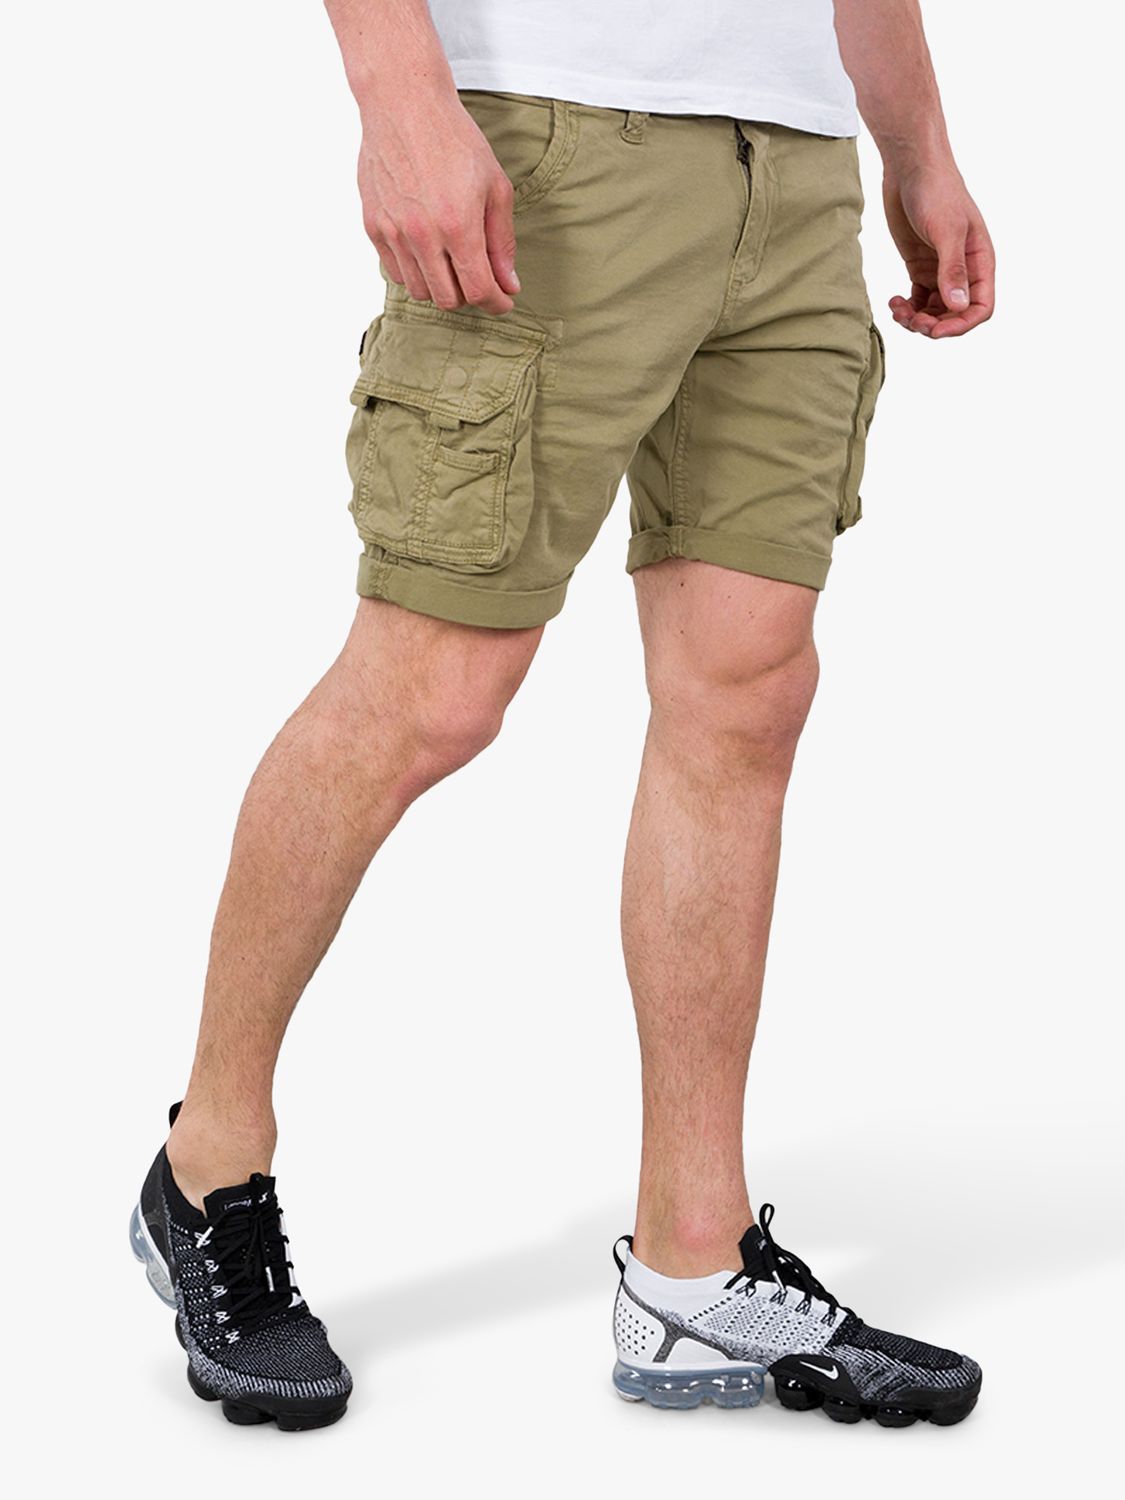 Alpha Industries Crew Cargo Shorts, John & at 82 Light Partners Lewis Olive